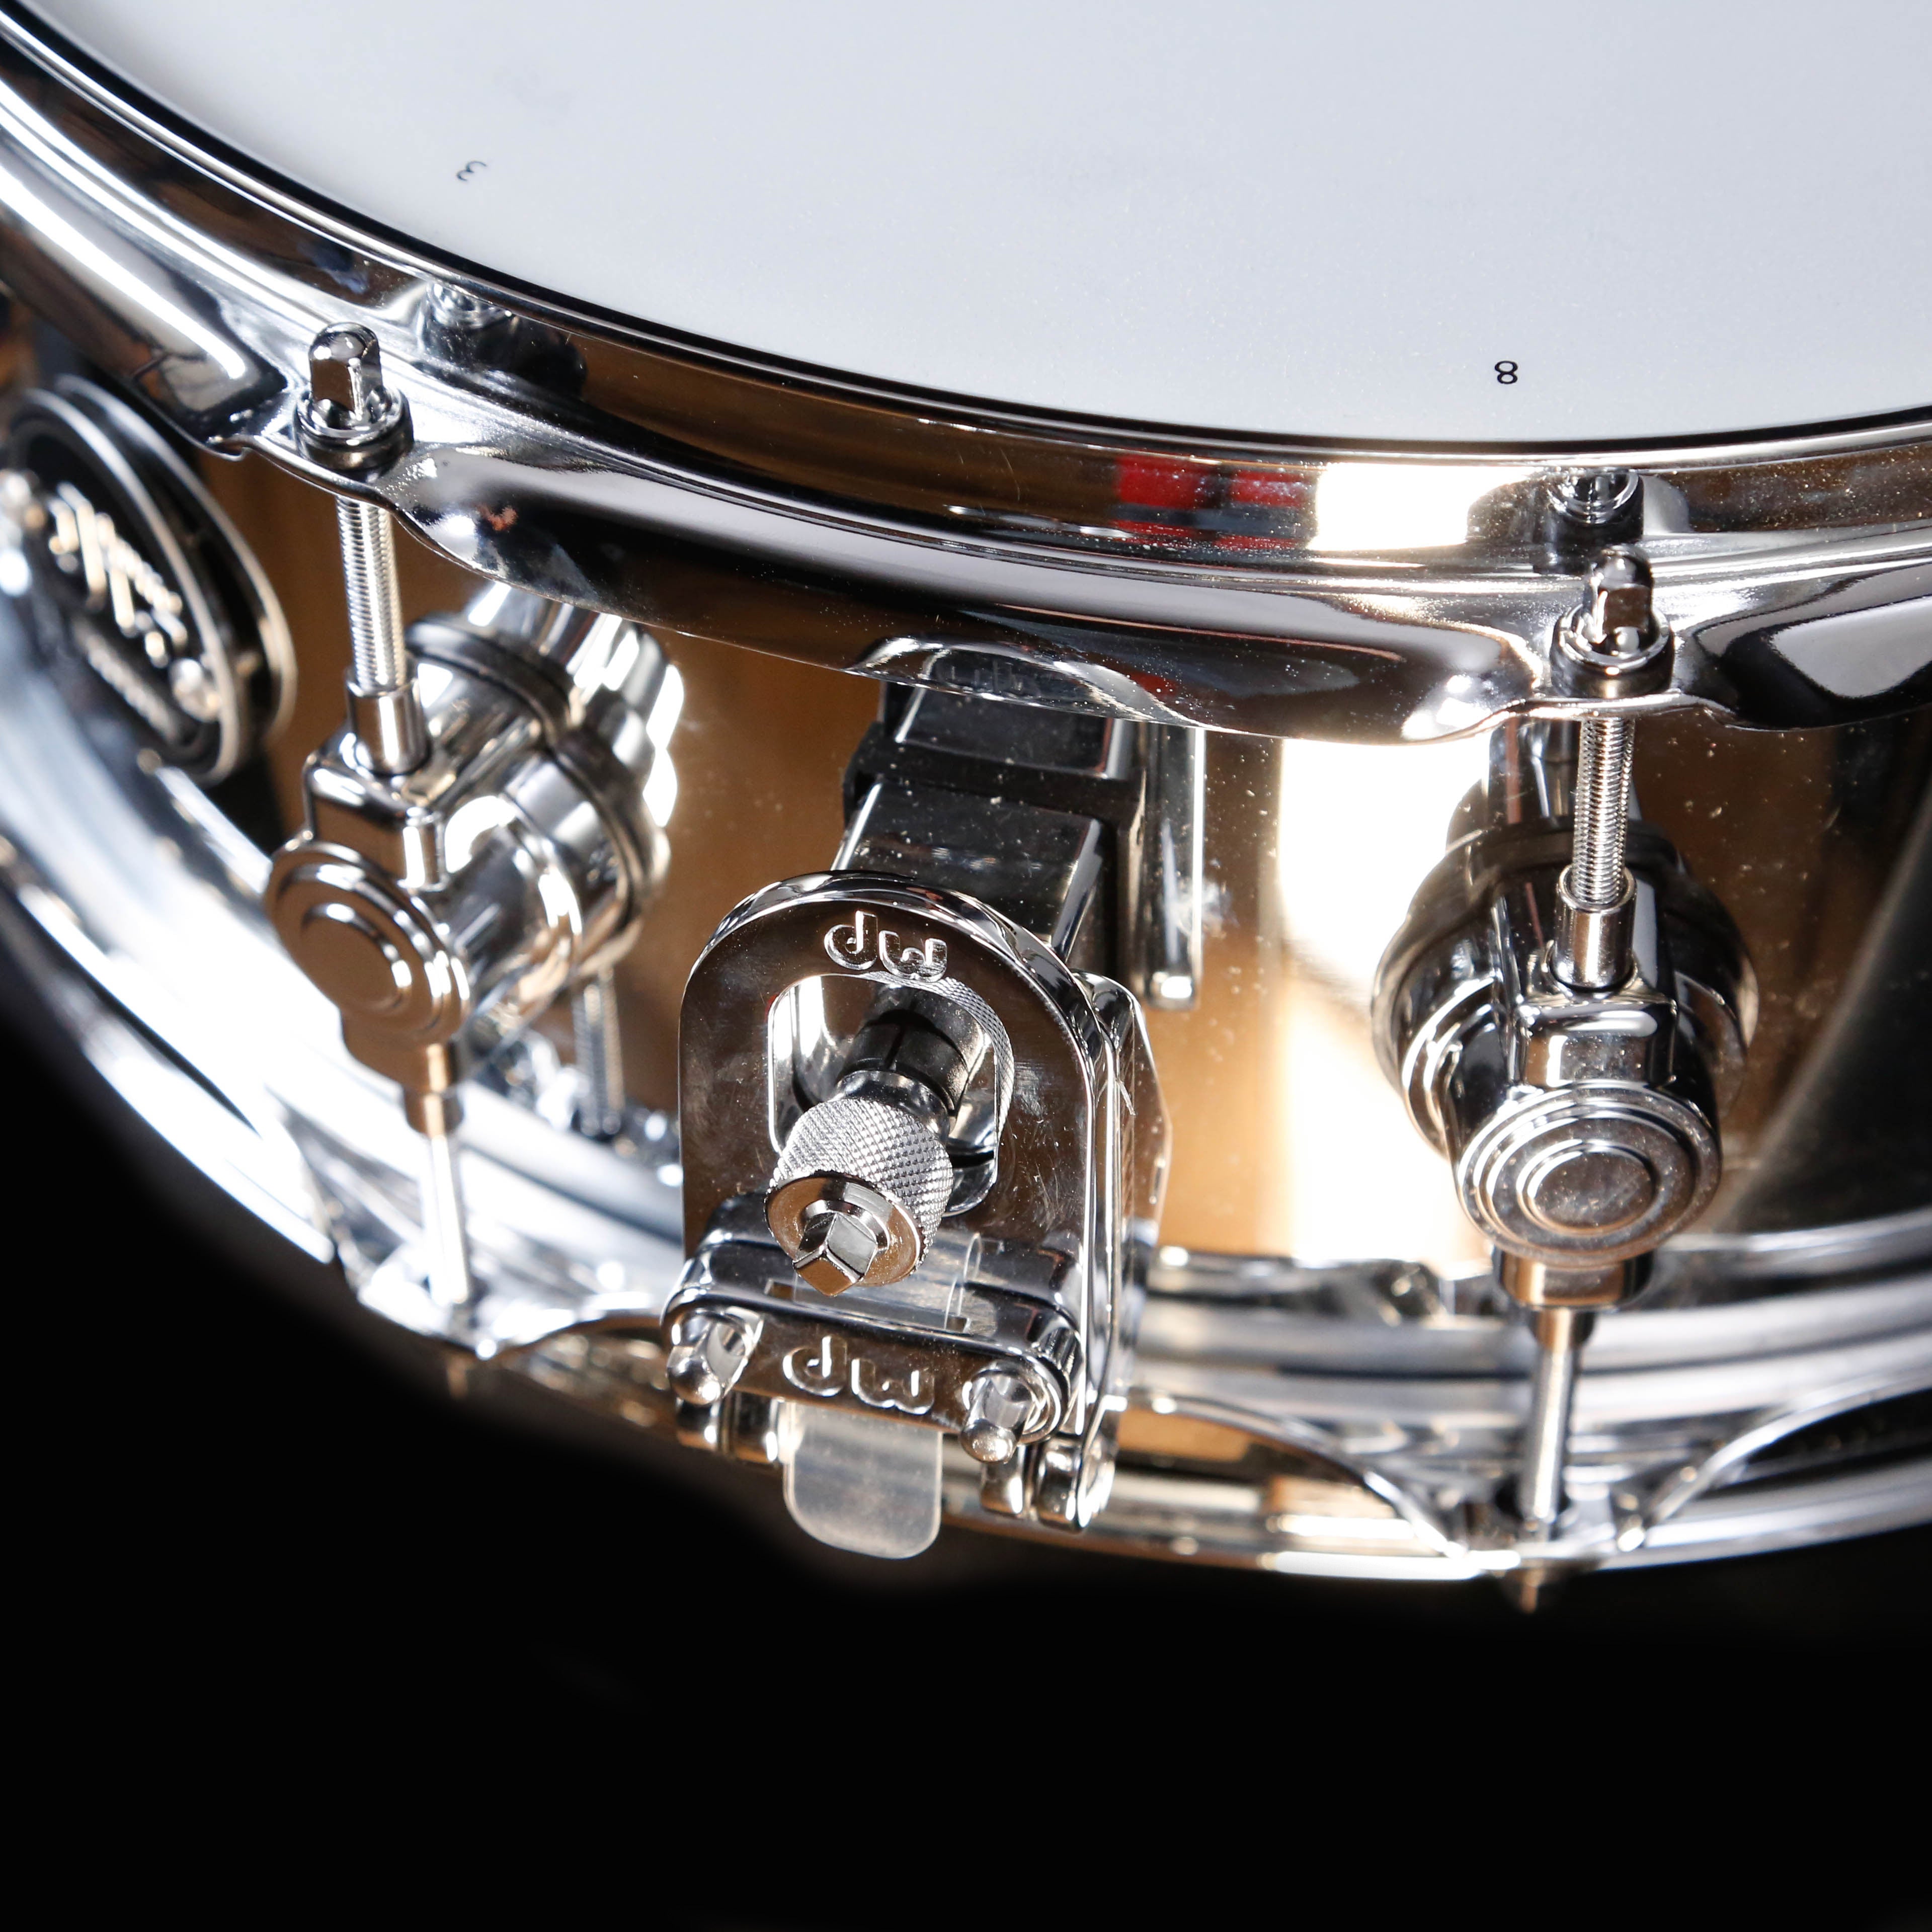 DW Performance Series Steel Snare, 5.5'' x 14''